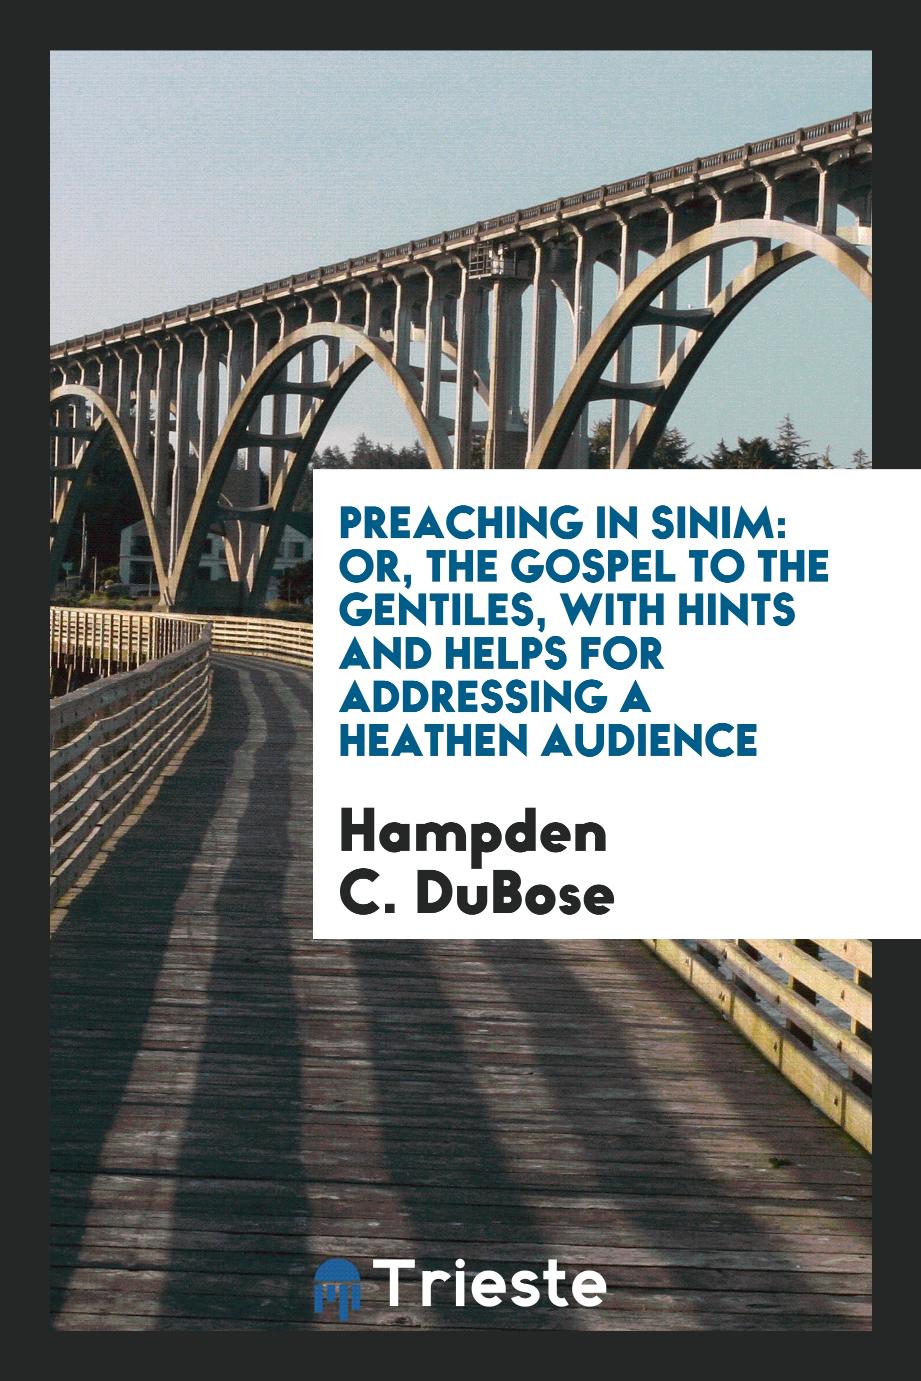 Preaching in Sinim: or, The Gospel to the gentiles, with hints and helps for addressing a heathen audience